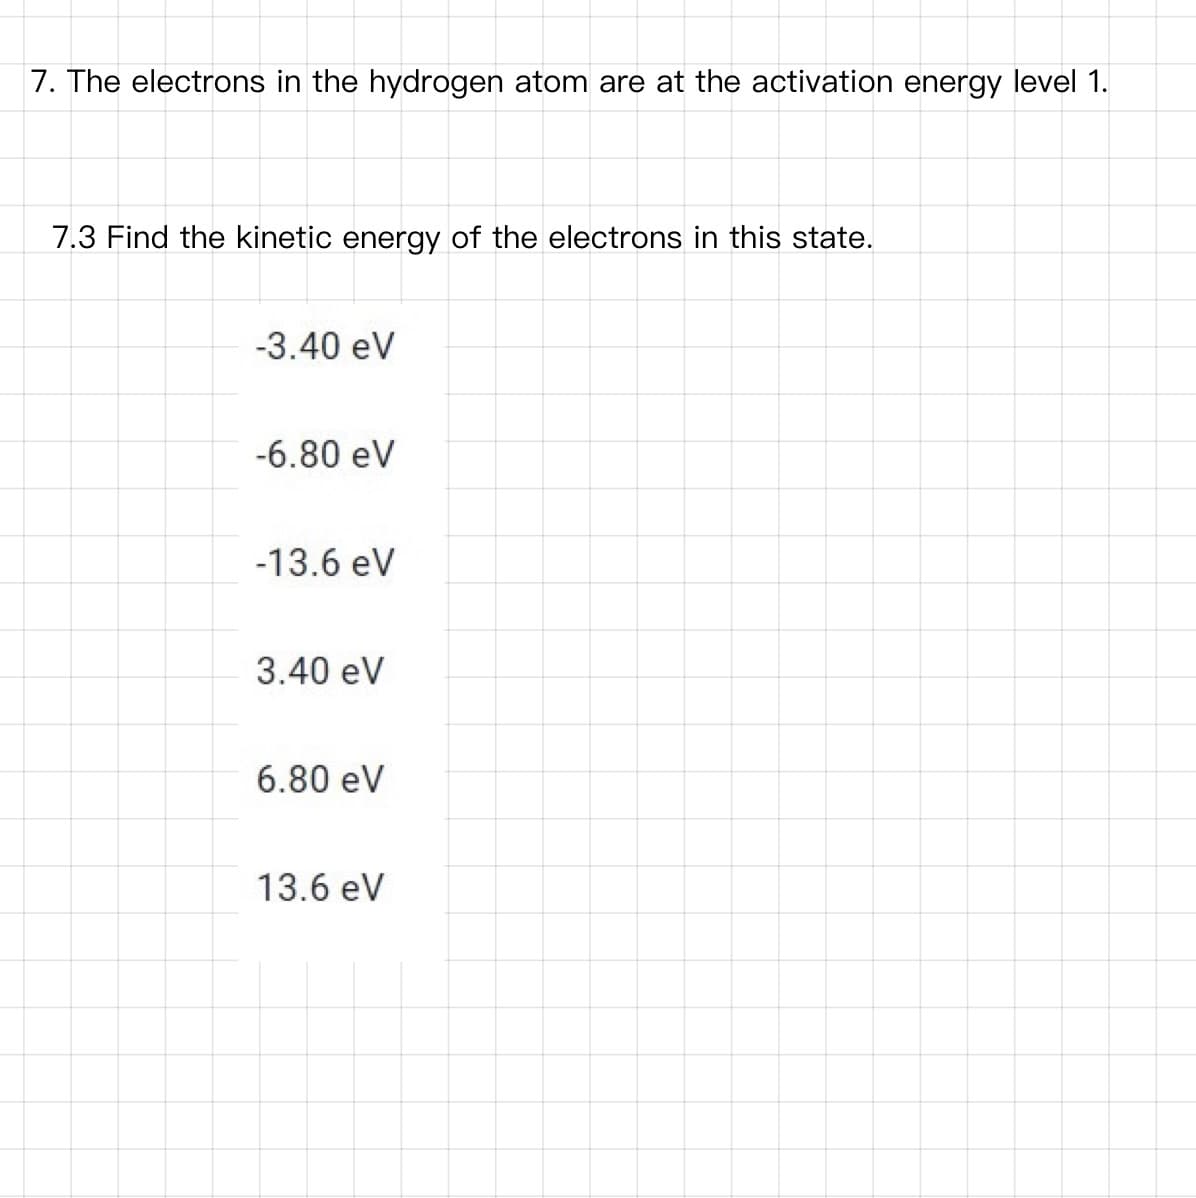 7. The electrons in the hydrogen atom are at the activation energy level 1.
7.3 Find the kinetic energy of the electrons in this state.
-3.40 eV
-6.80 eV
-13.6 eV
3.40 eV
6.80 eV
13.6 eV
